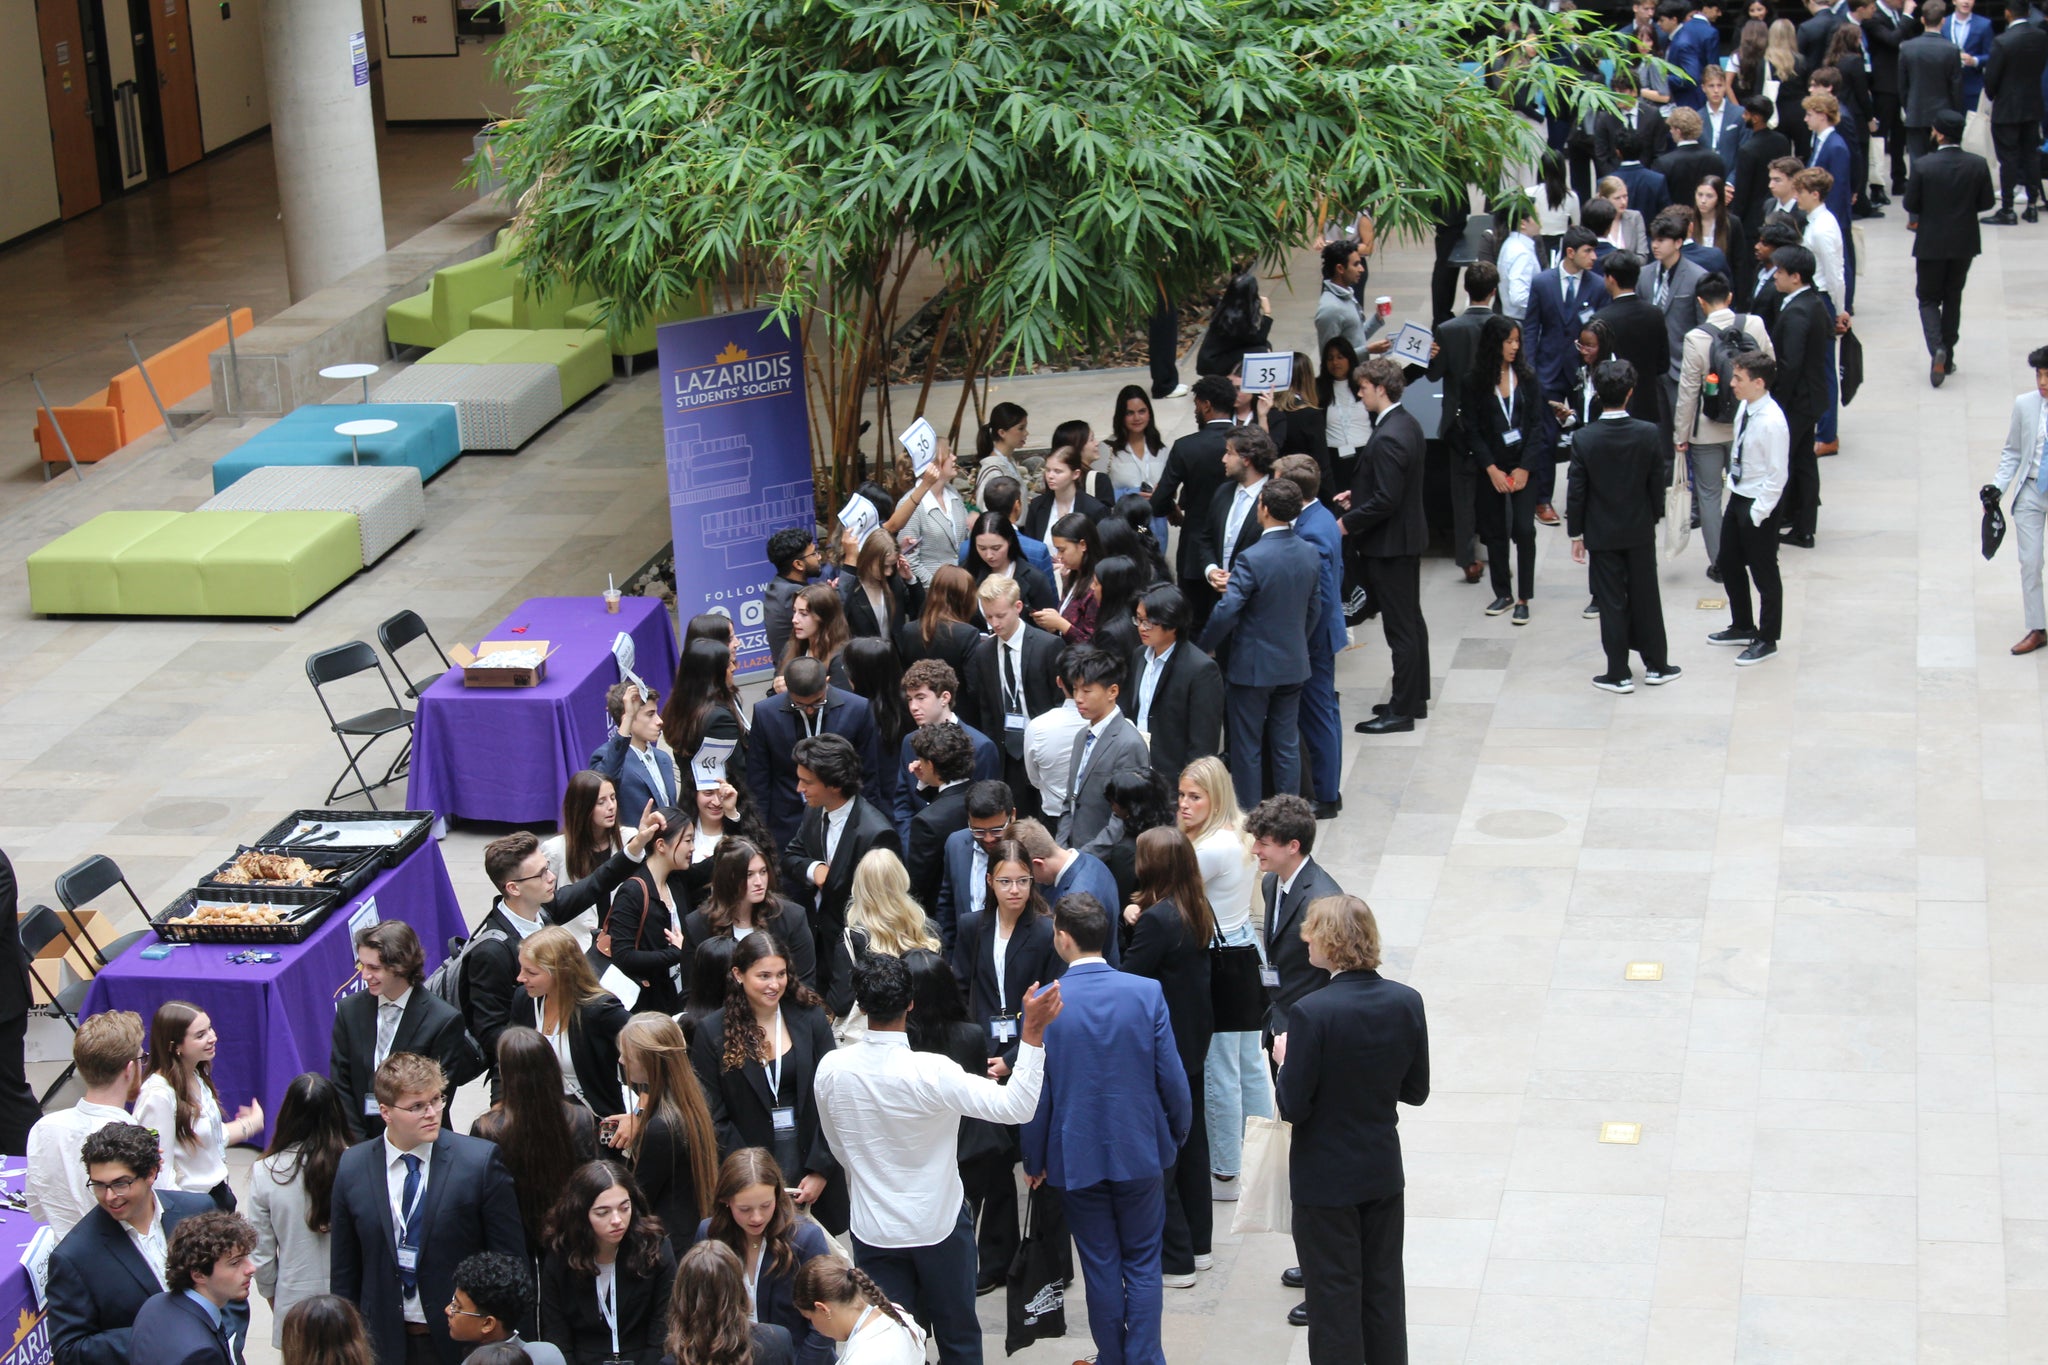 Image of first-year students networking in the Laz Atrium during O-Day 2023